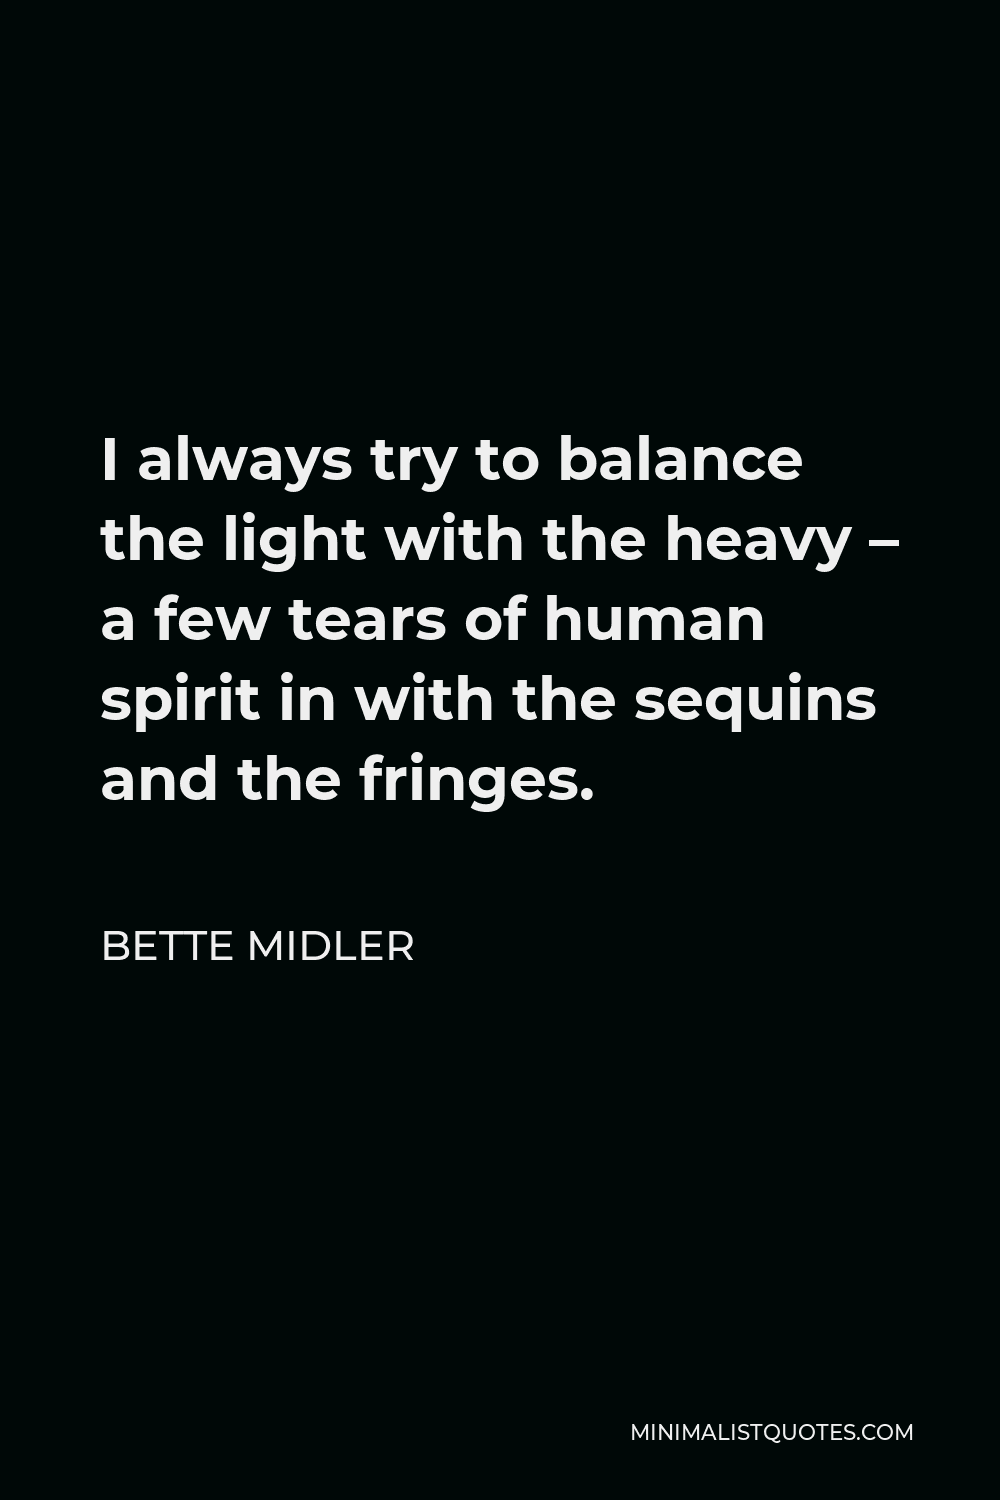 Bette Midler Quote - I always try to balance the light with the heavy – a few tears of human spirit in with the sequins and the fringes.